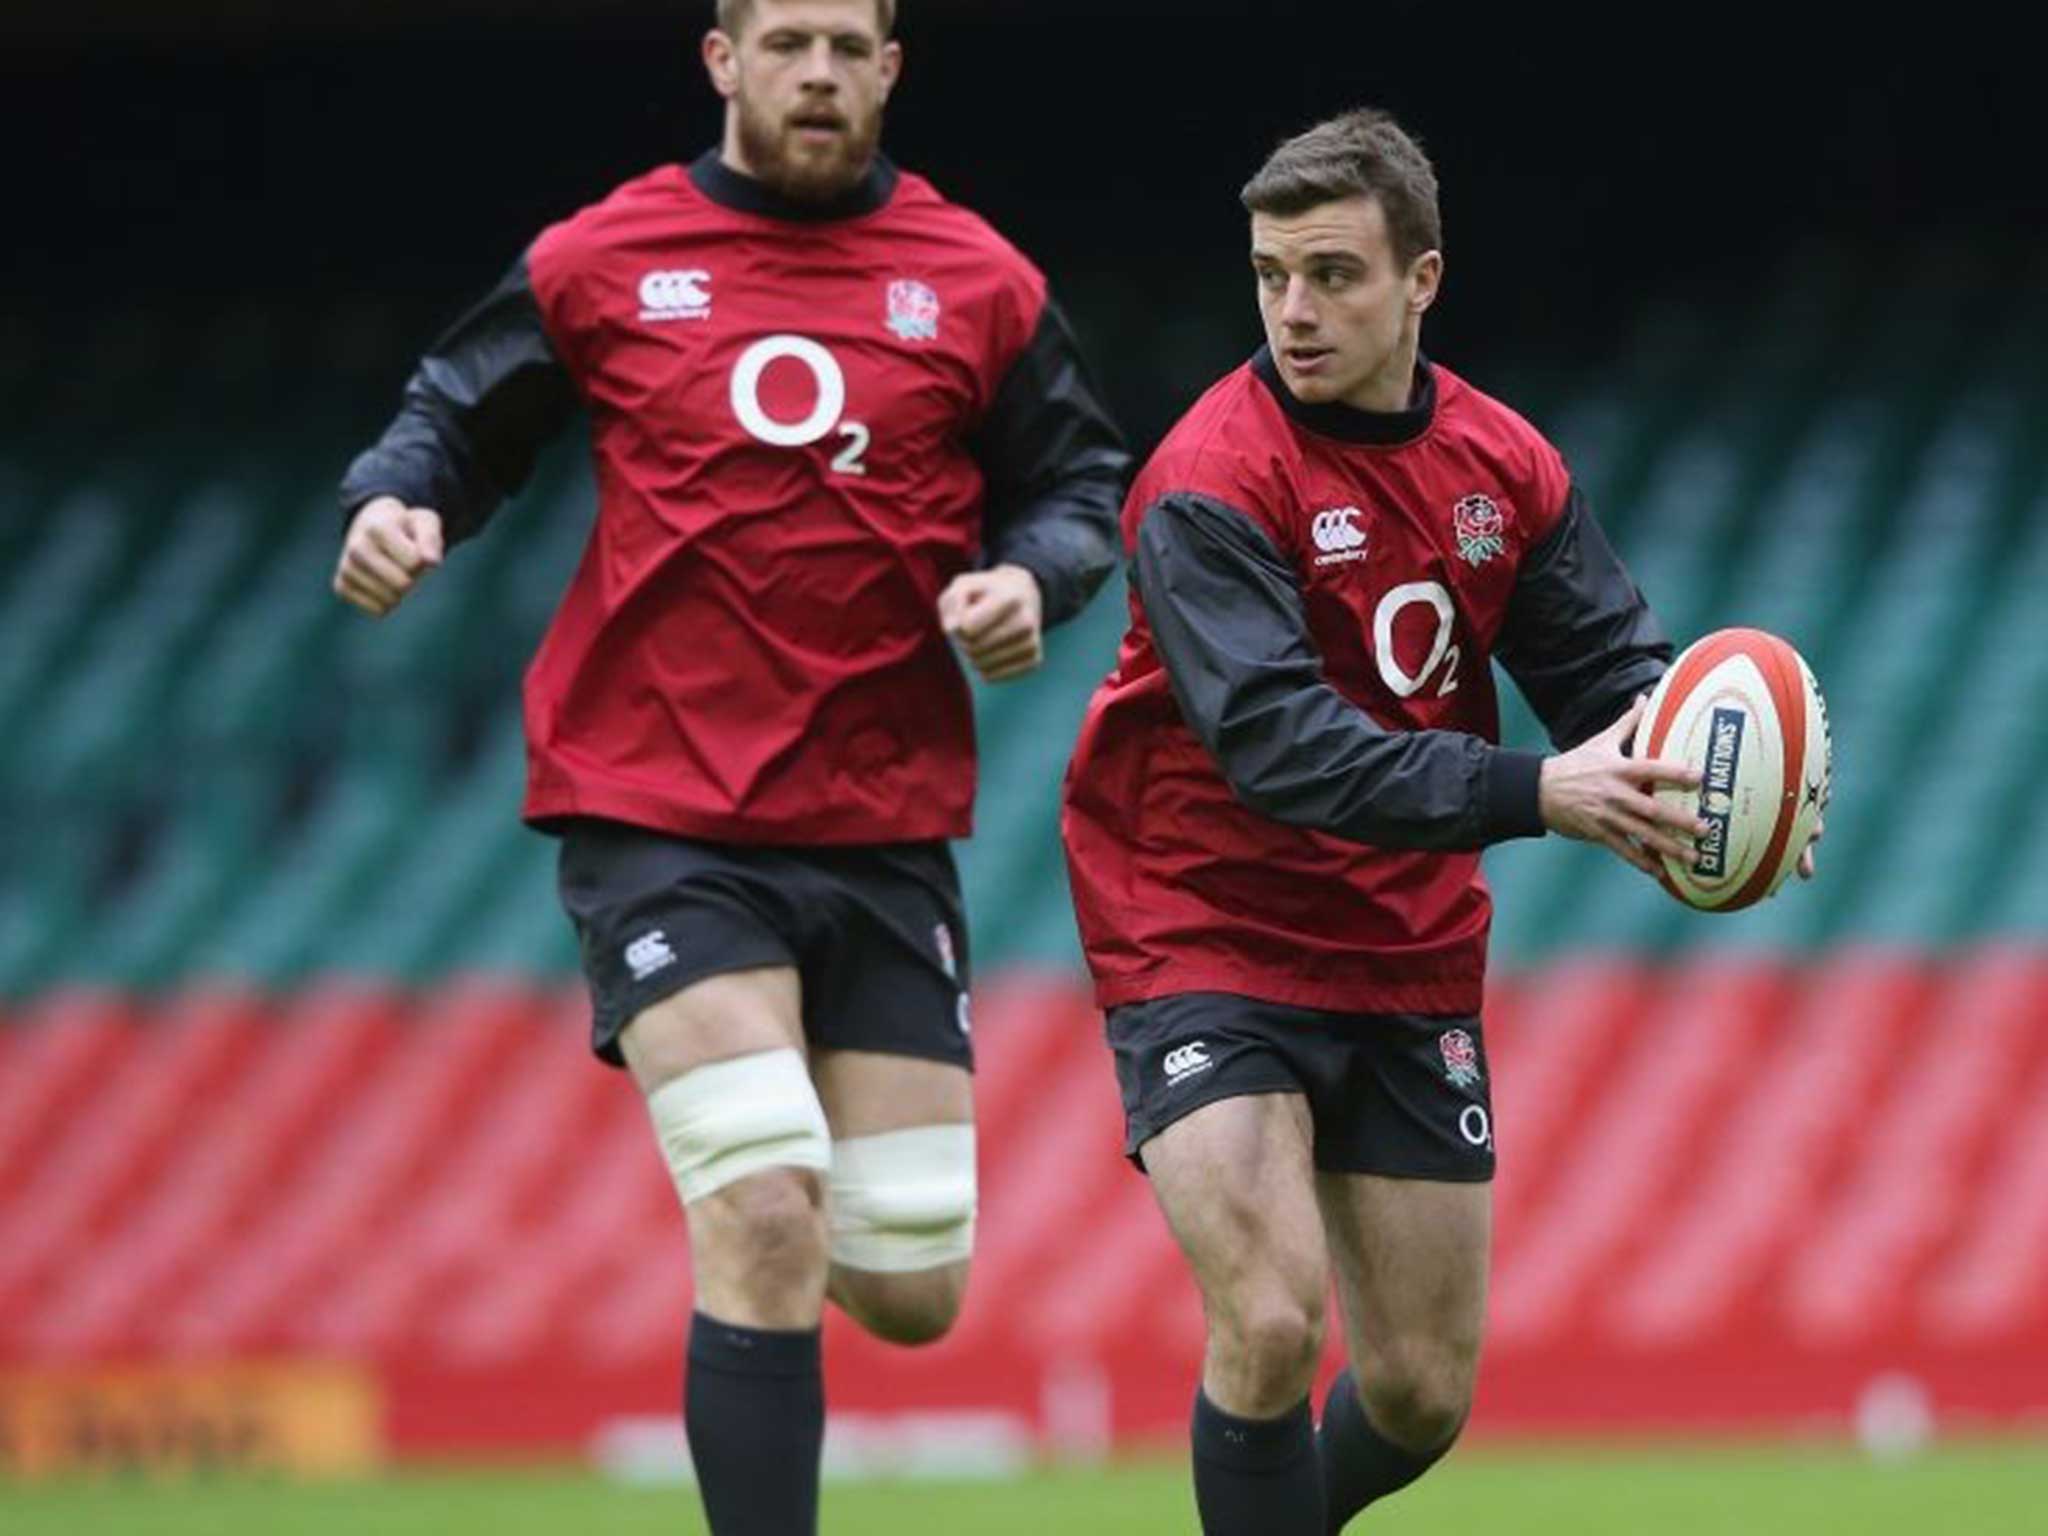 England’s George Ford runs with the ball during the captain’s run at the Millennium Stadium